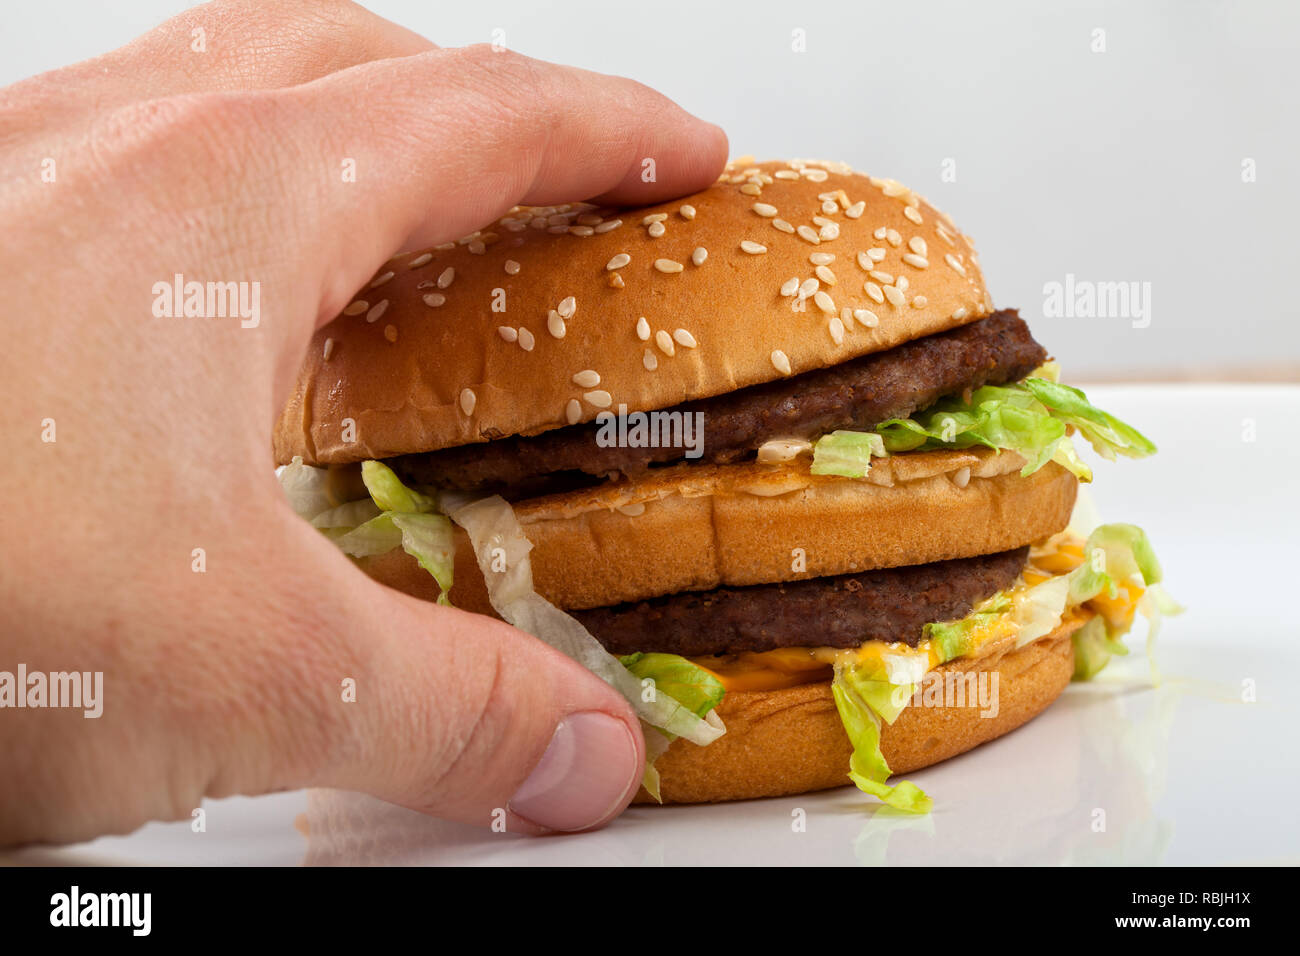 Close up picture of human hand holding a tasty double cheeseburger with lettuce Stock Photo